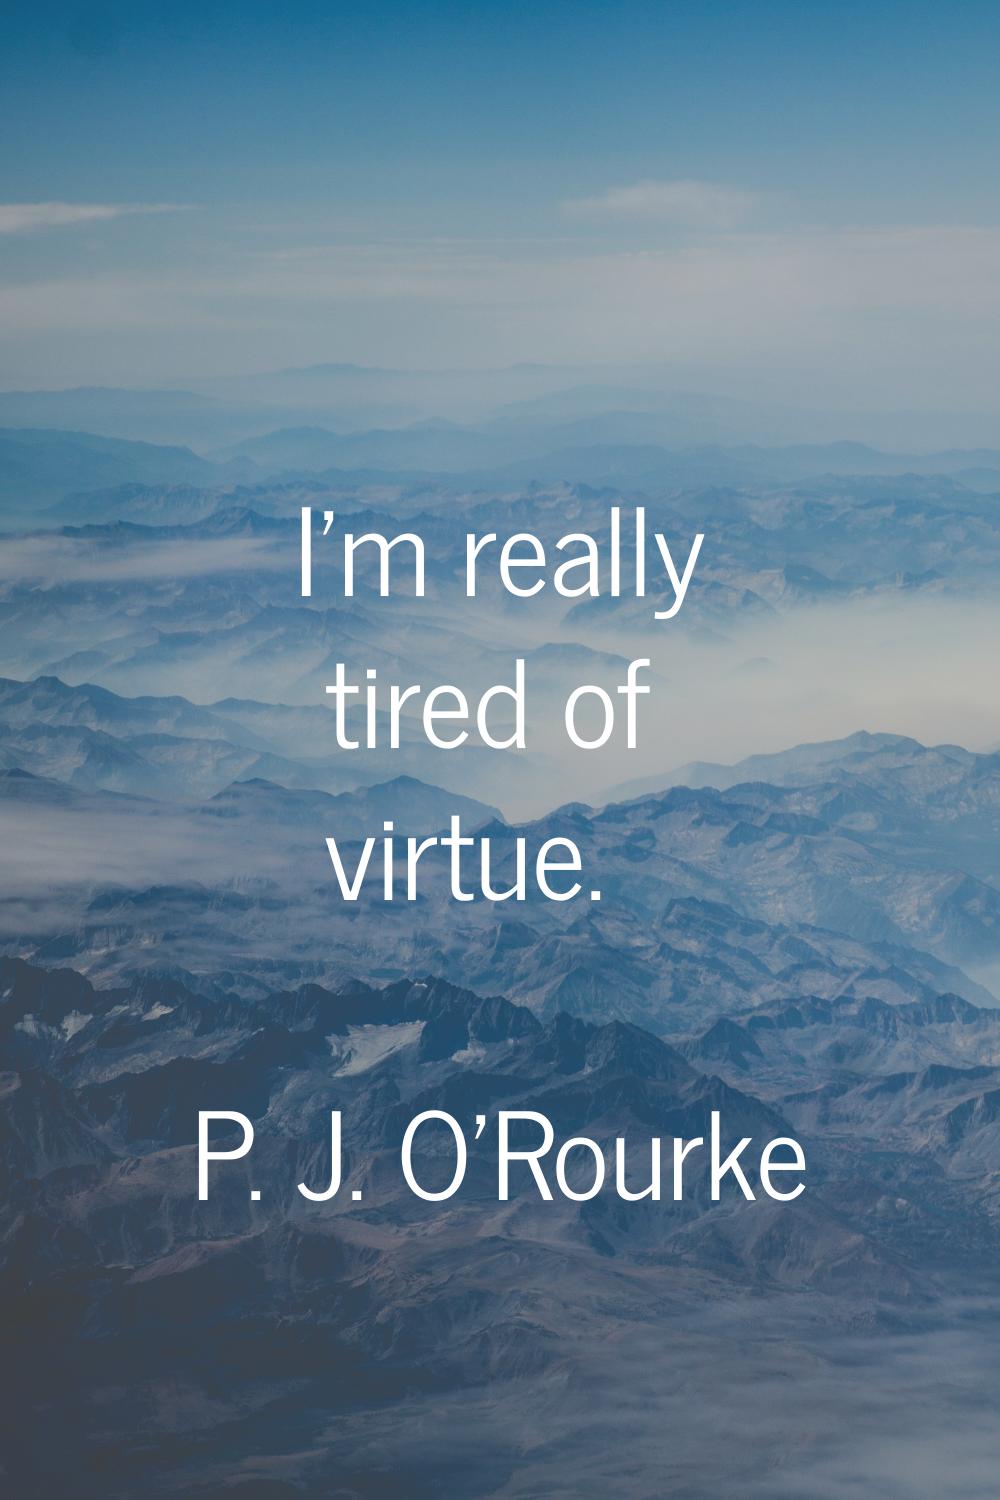 I'm really tired of virtue.